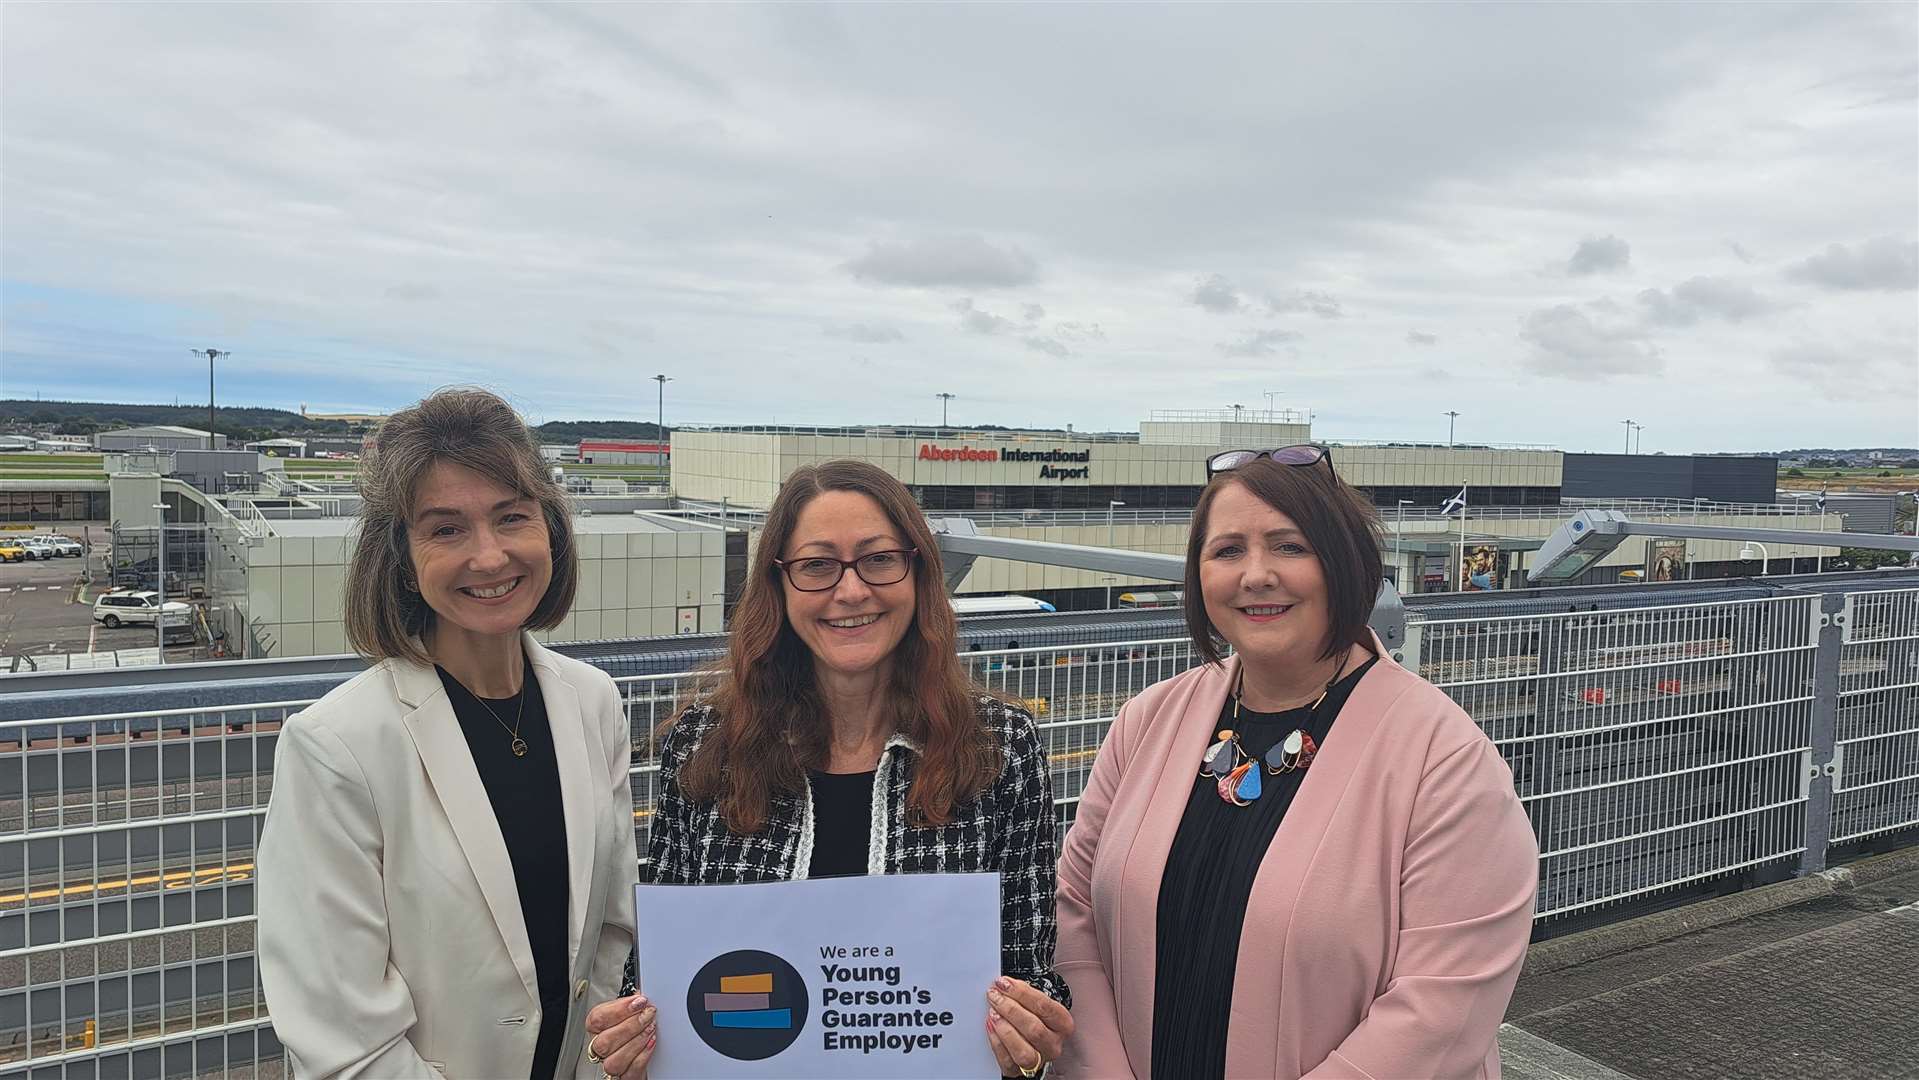 At Aberdeen International Airport are (from left) Clare Scott, DYW North East marketing executive; Catriona McKain, HR business partner at Aberdeen International Airport and Margo Milne, DYW North East director.